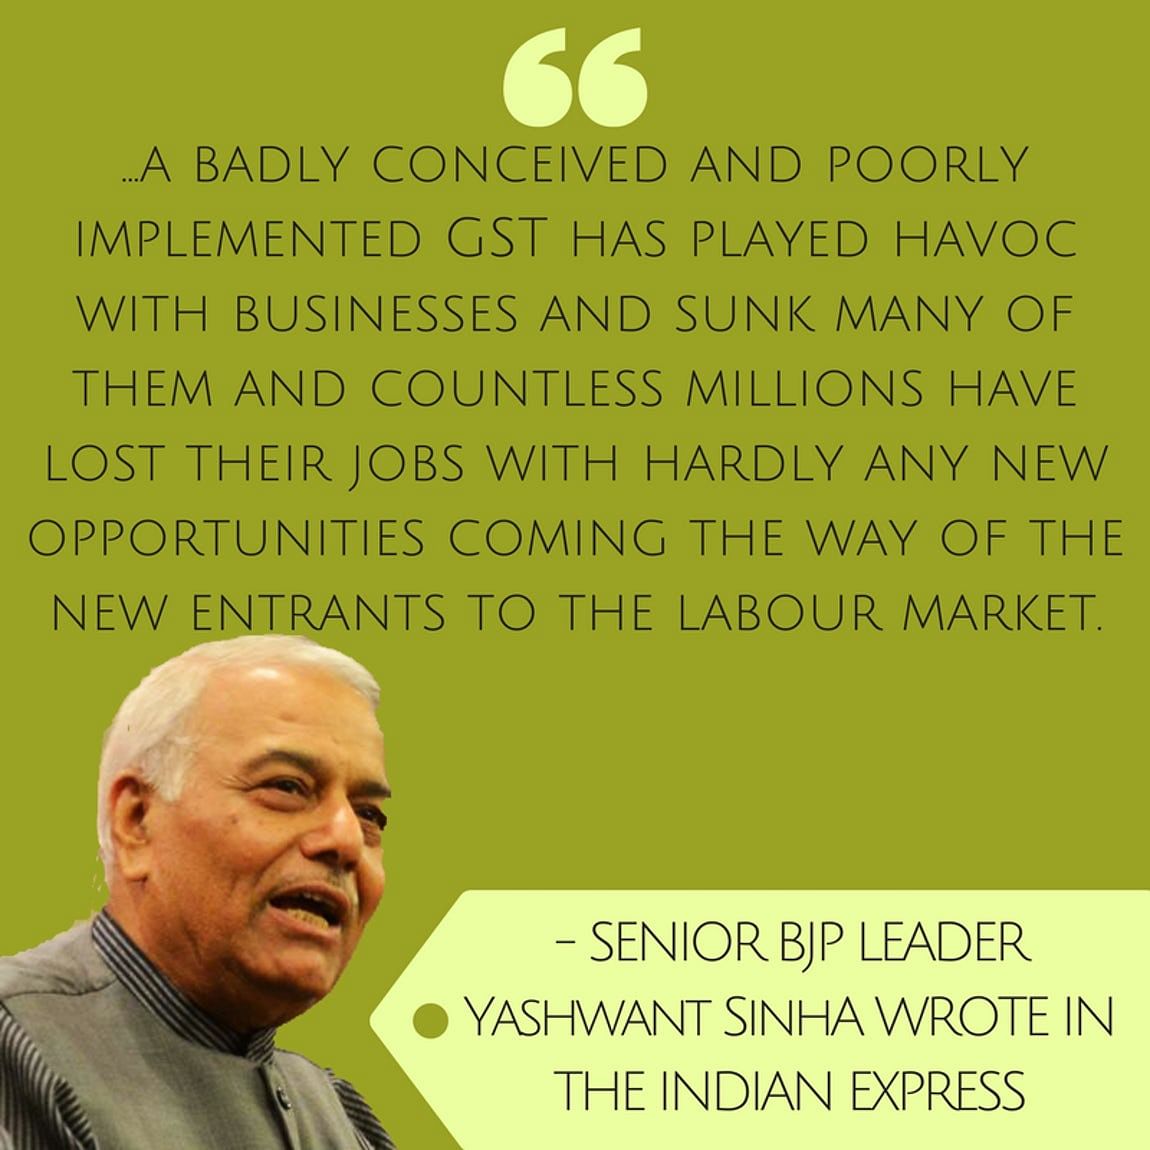 Yashwant Sinha is not the lone BJP leader to disapprove of his party-run government’s economic policies. 